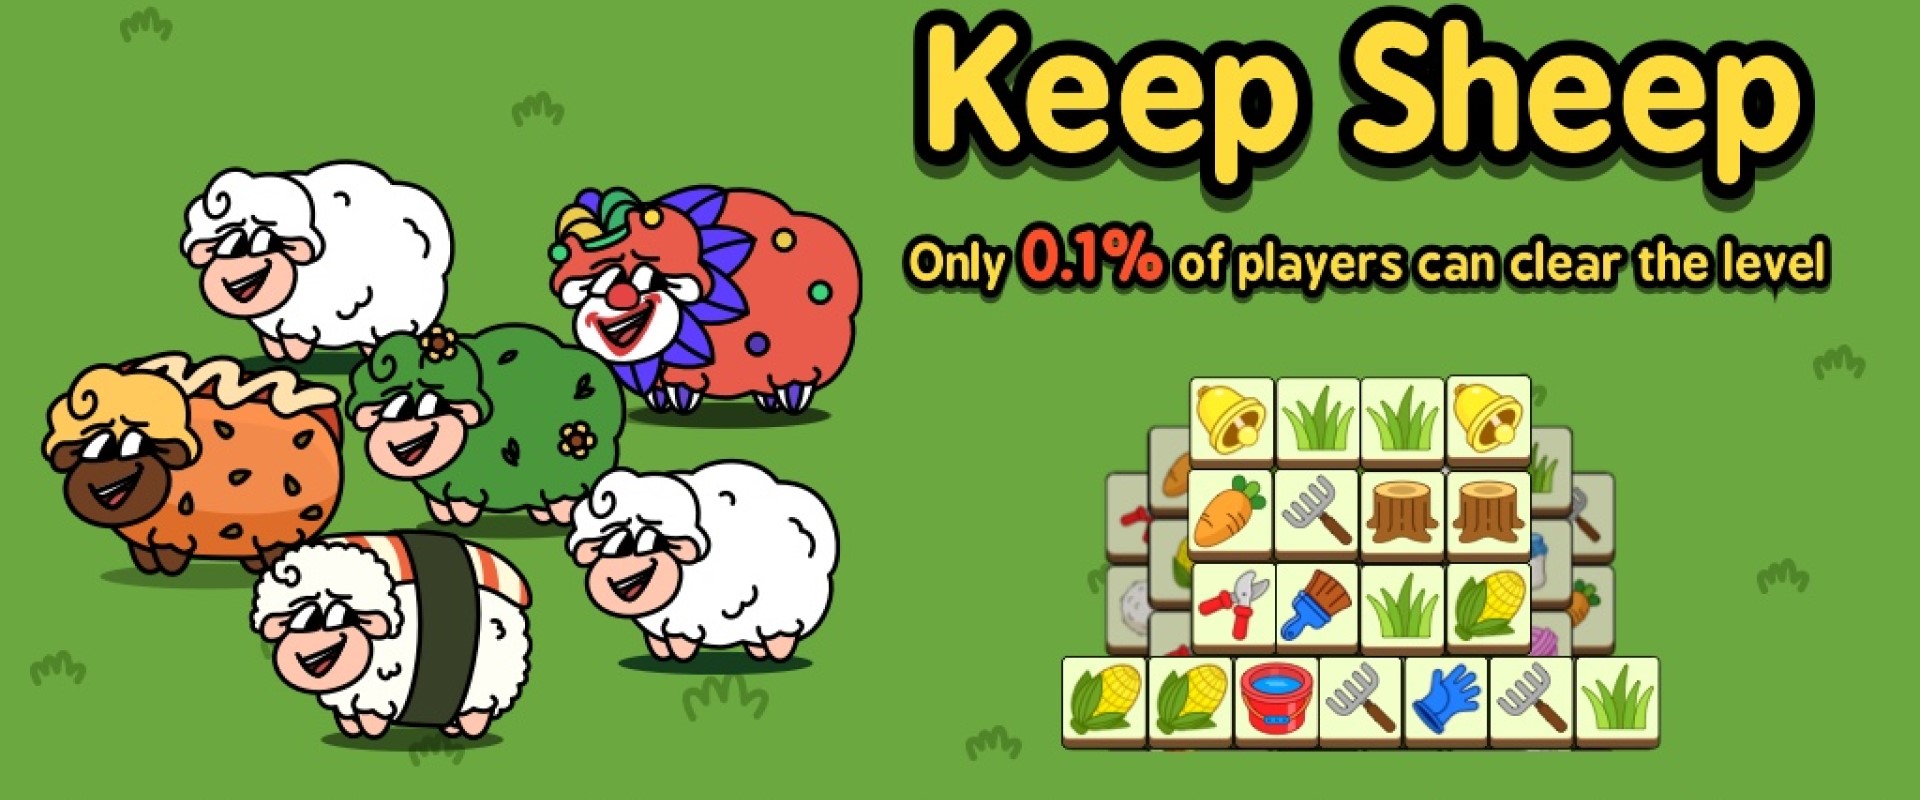 Download & Play Sheep N Sheep: Match 3 Games on PC & Mac with NoxPlayer (Emulator)